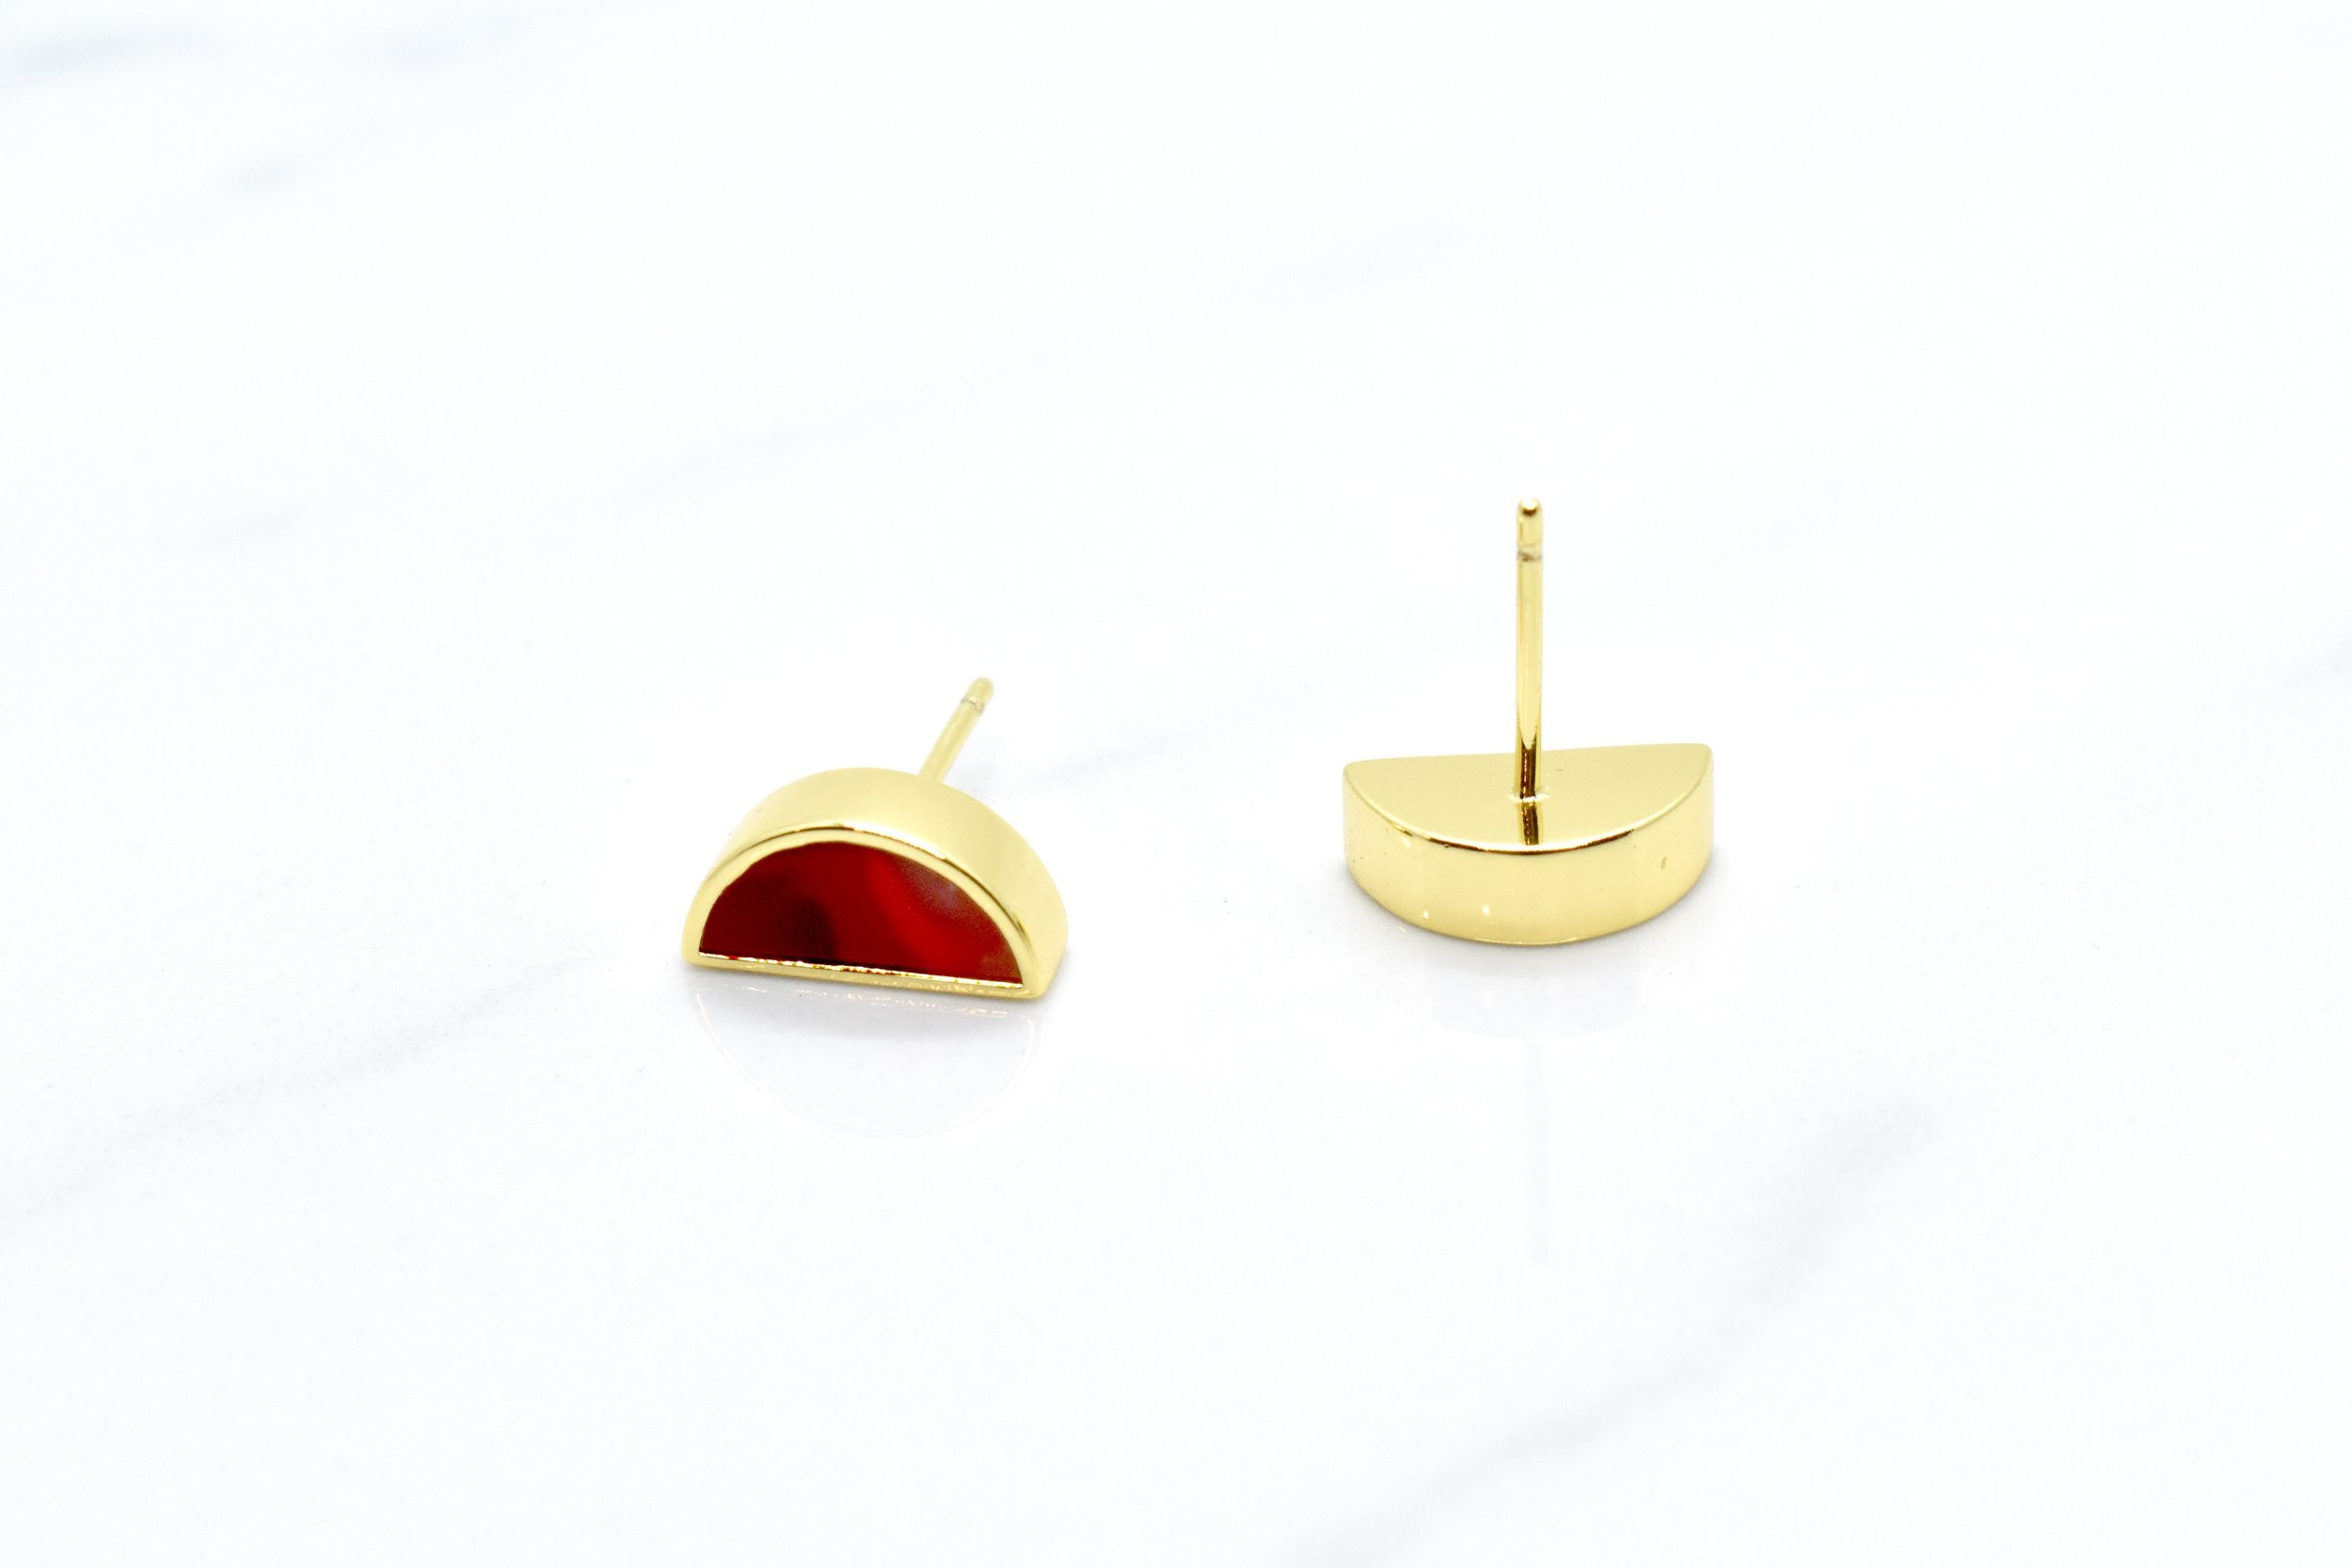 deep ruby red marbled tiny halfmoon earrings with 24k gold plating on white background